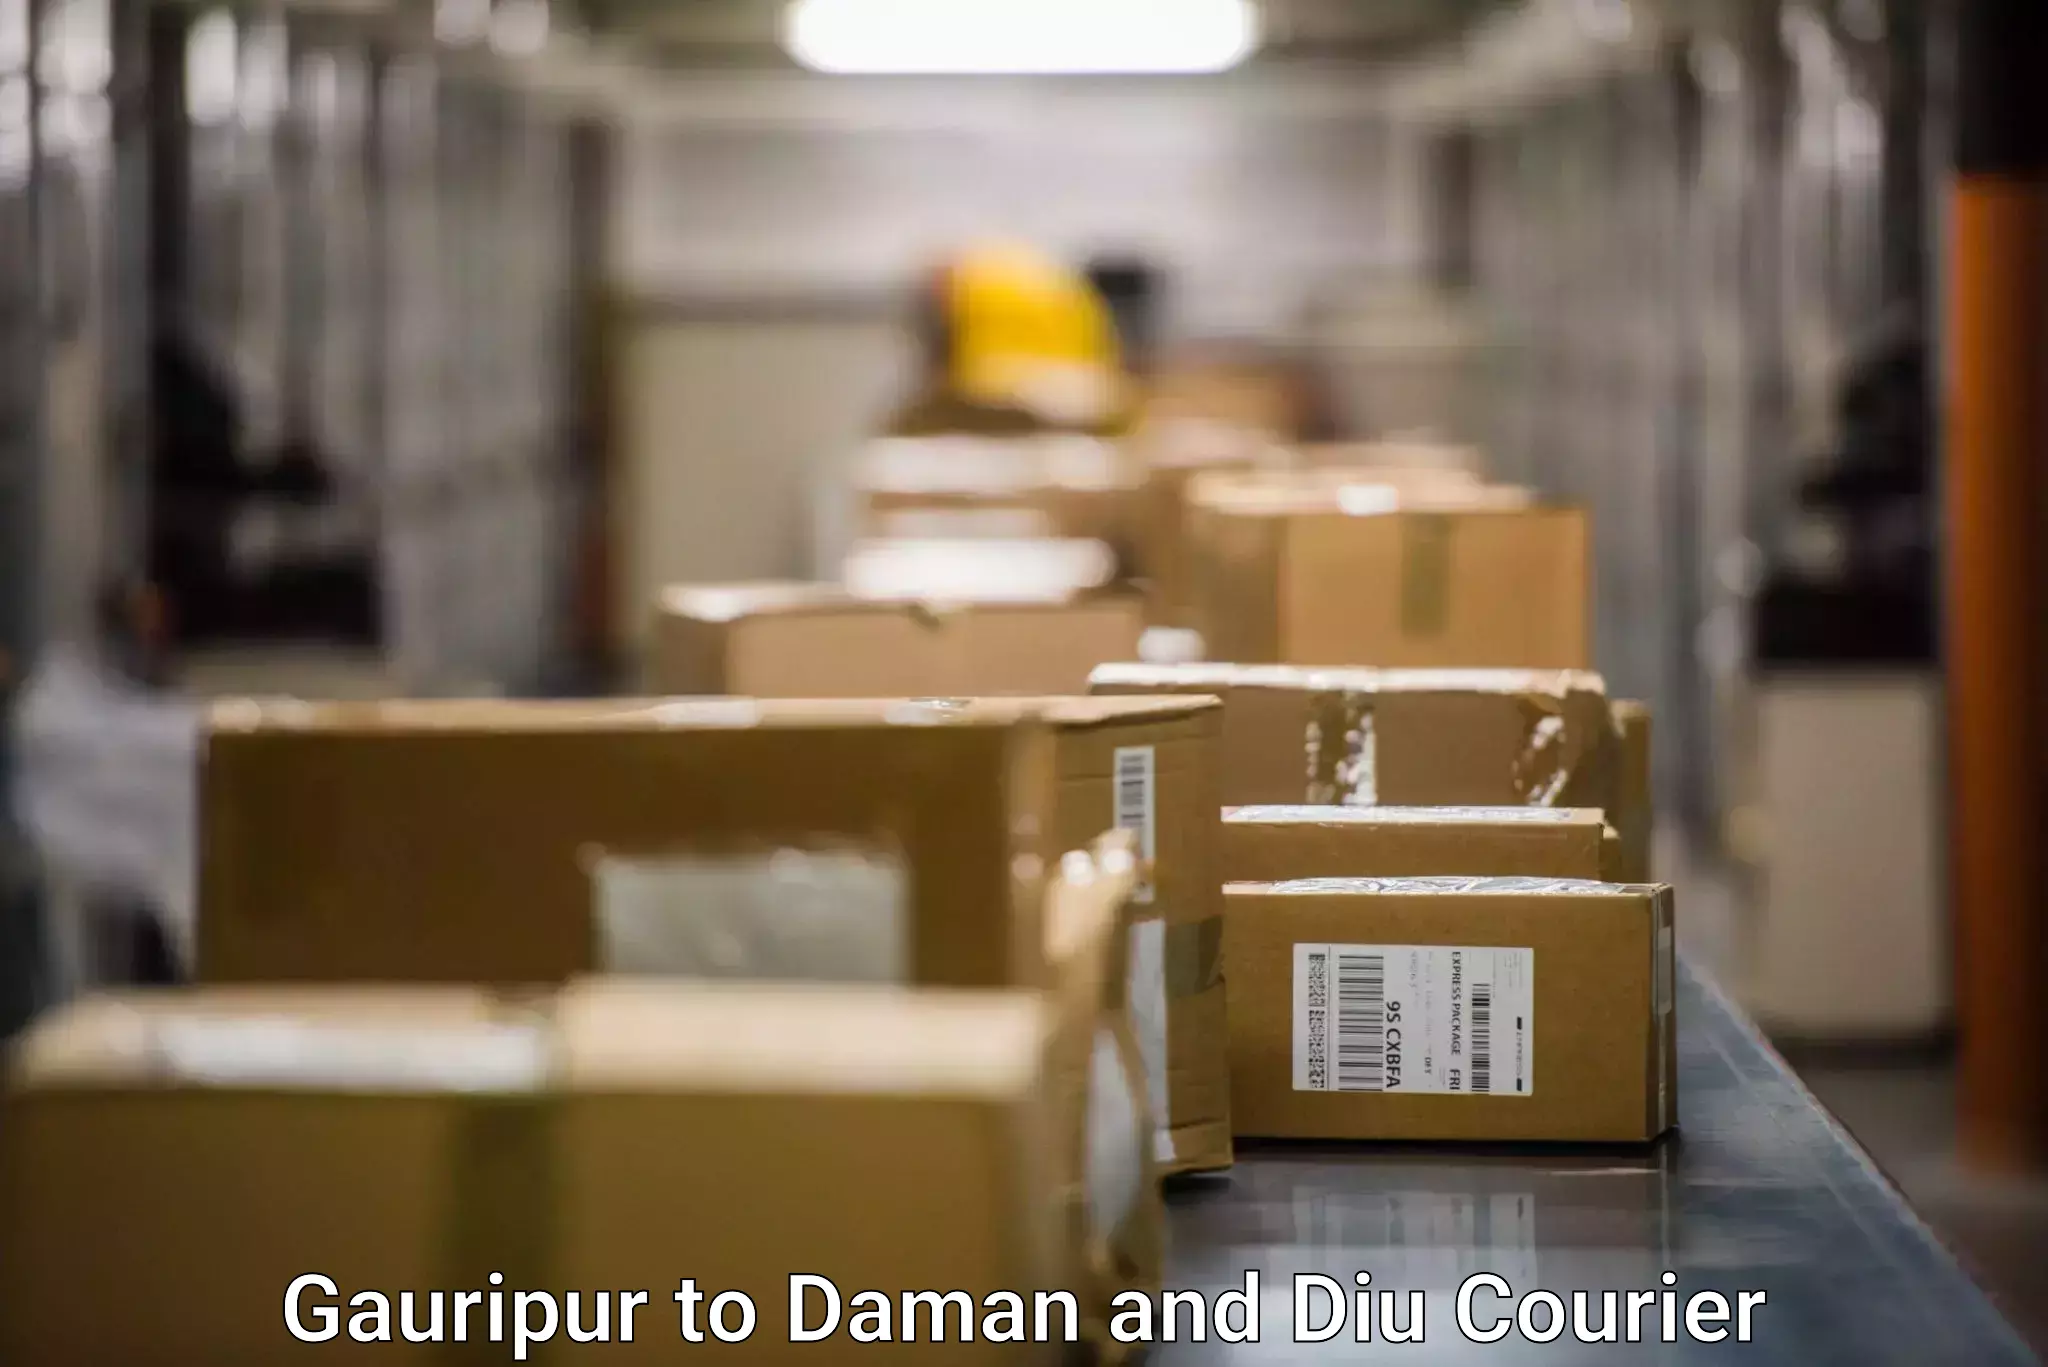 Tailored shipping plans Gauripur to Daman and Diu